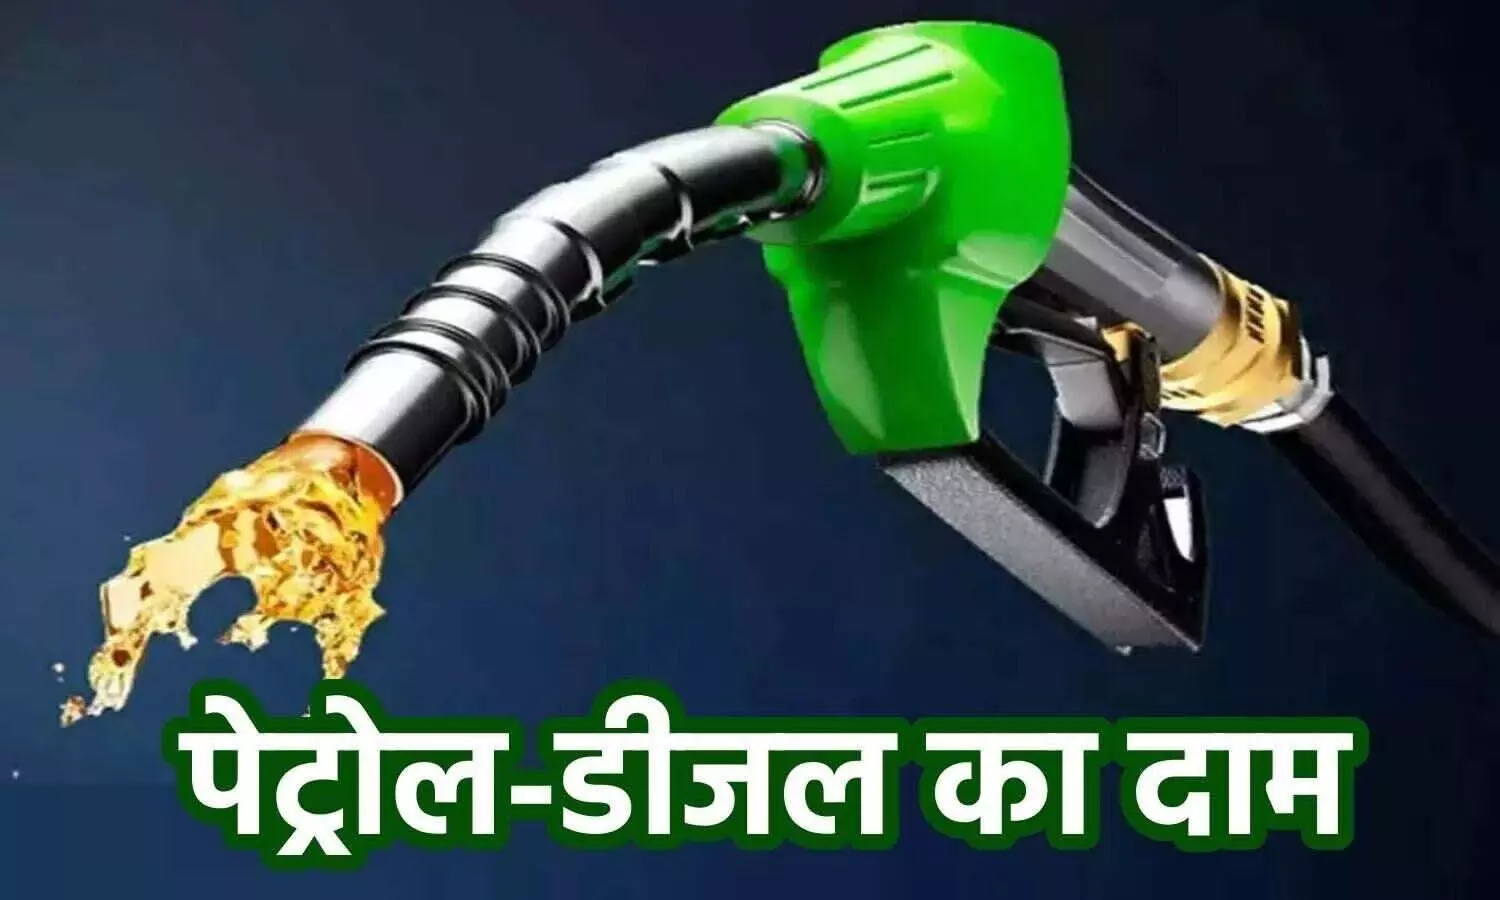 The round of mercy on oil consumers continues, check the new rate of petrol and diesel immediately